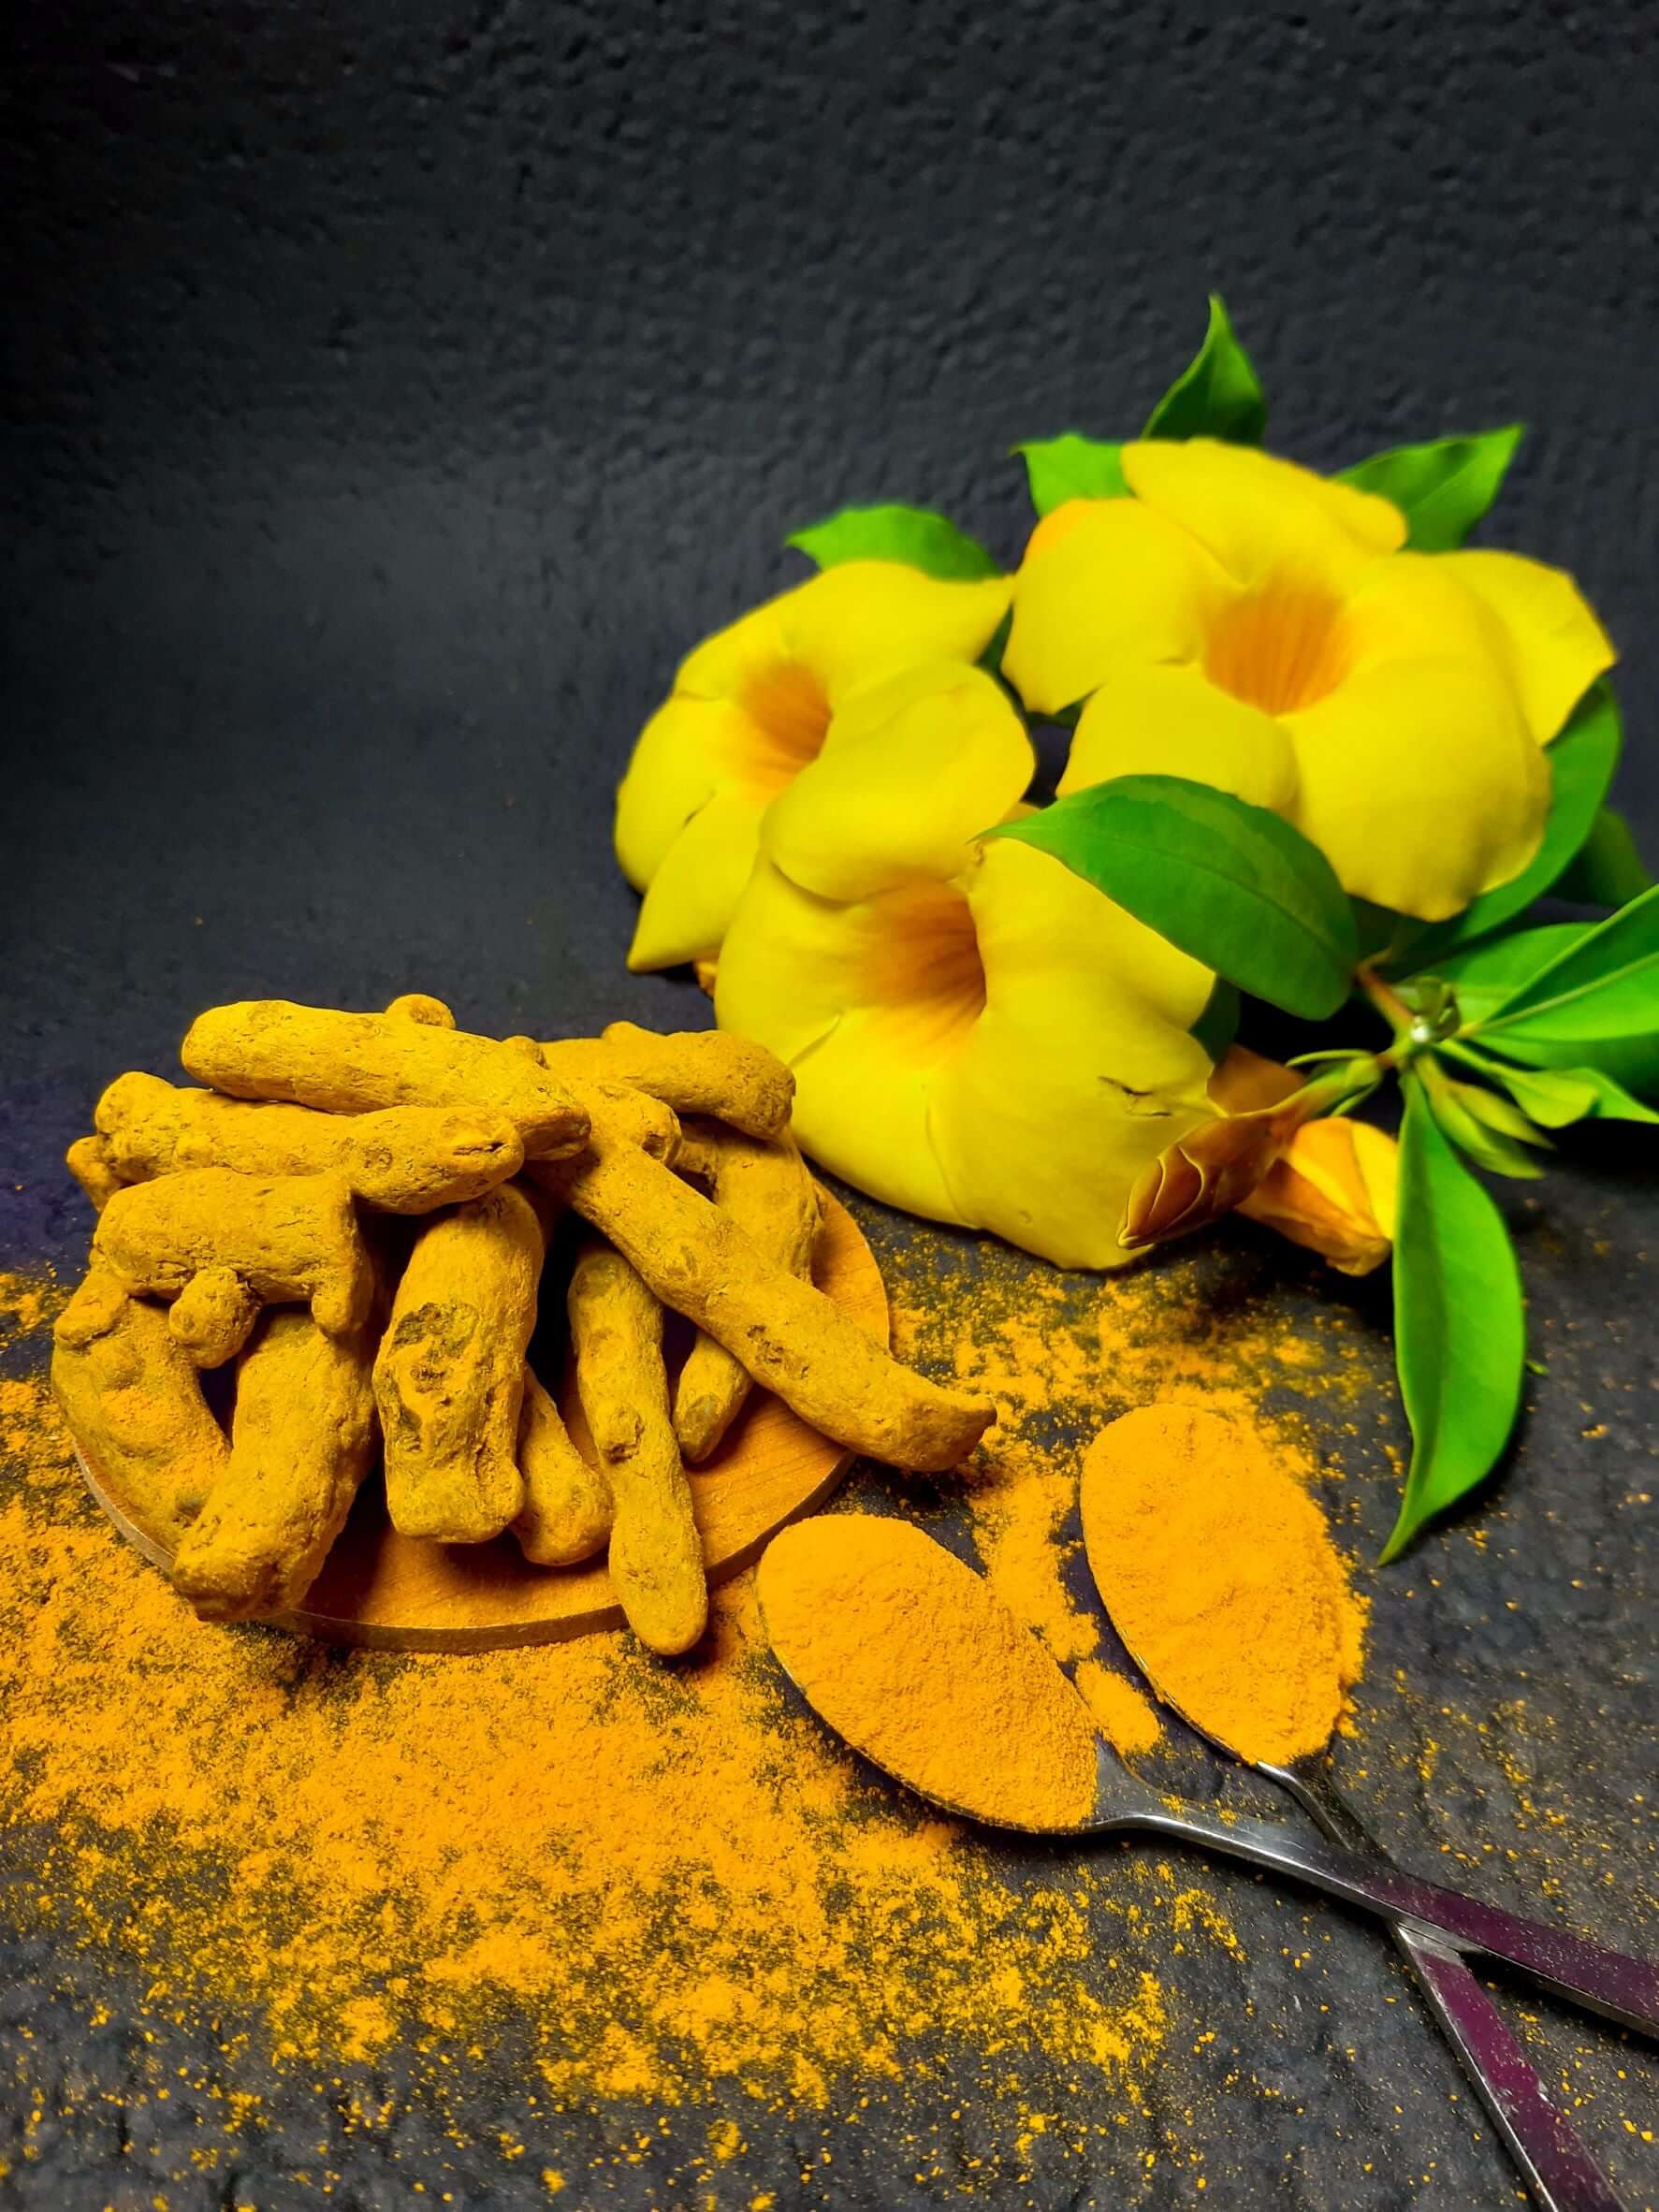 Turmeric - The ancient ingredient you need in your skincare